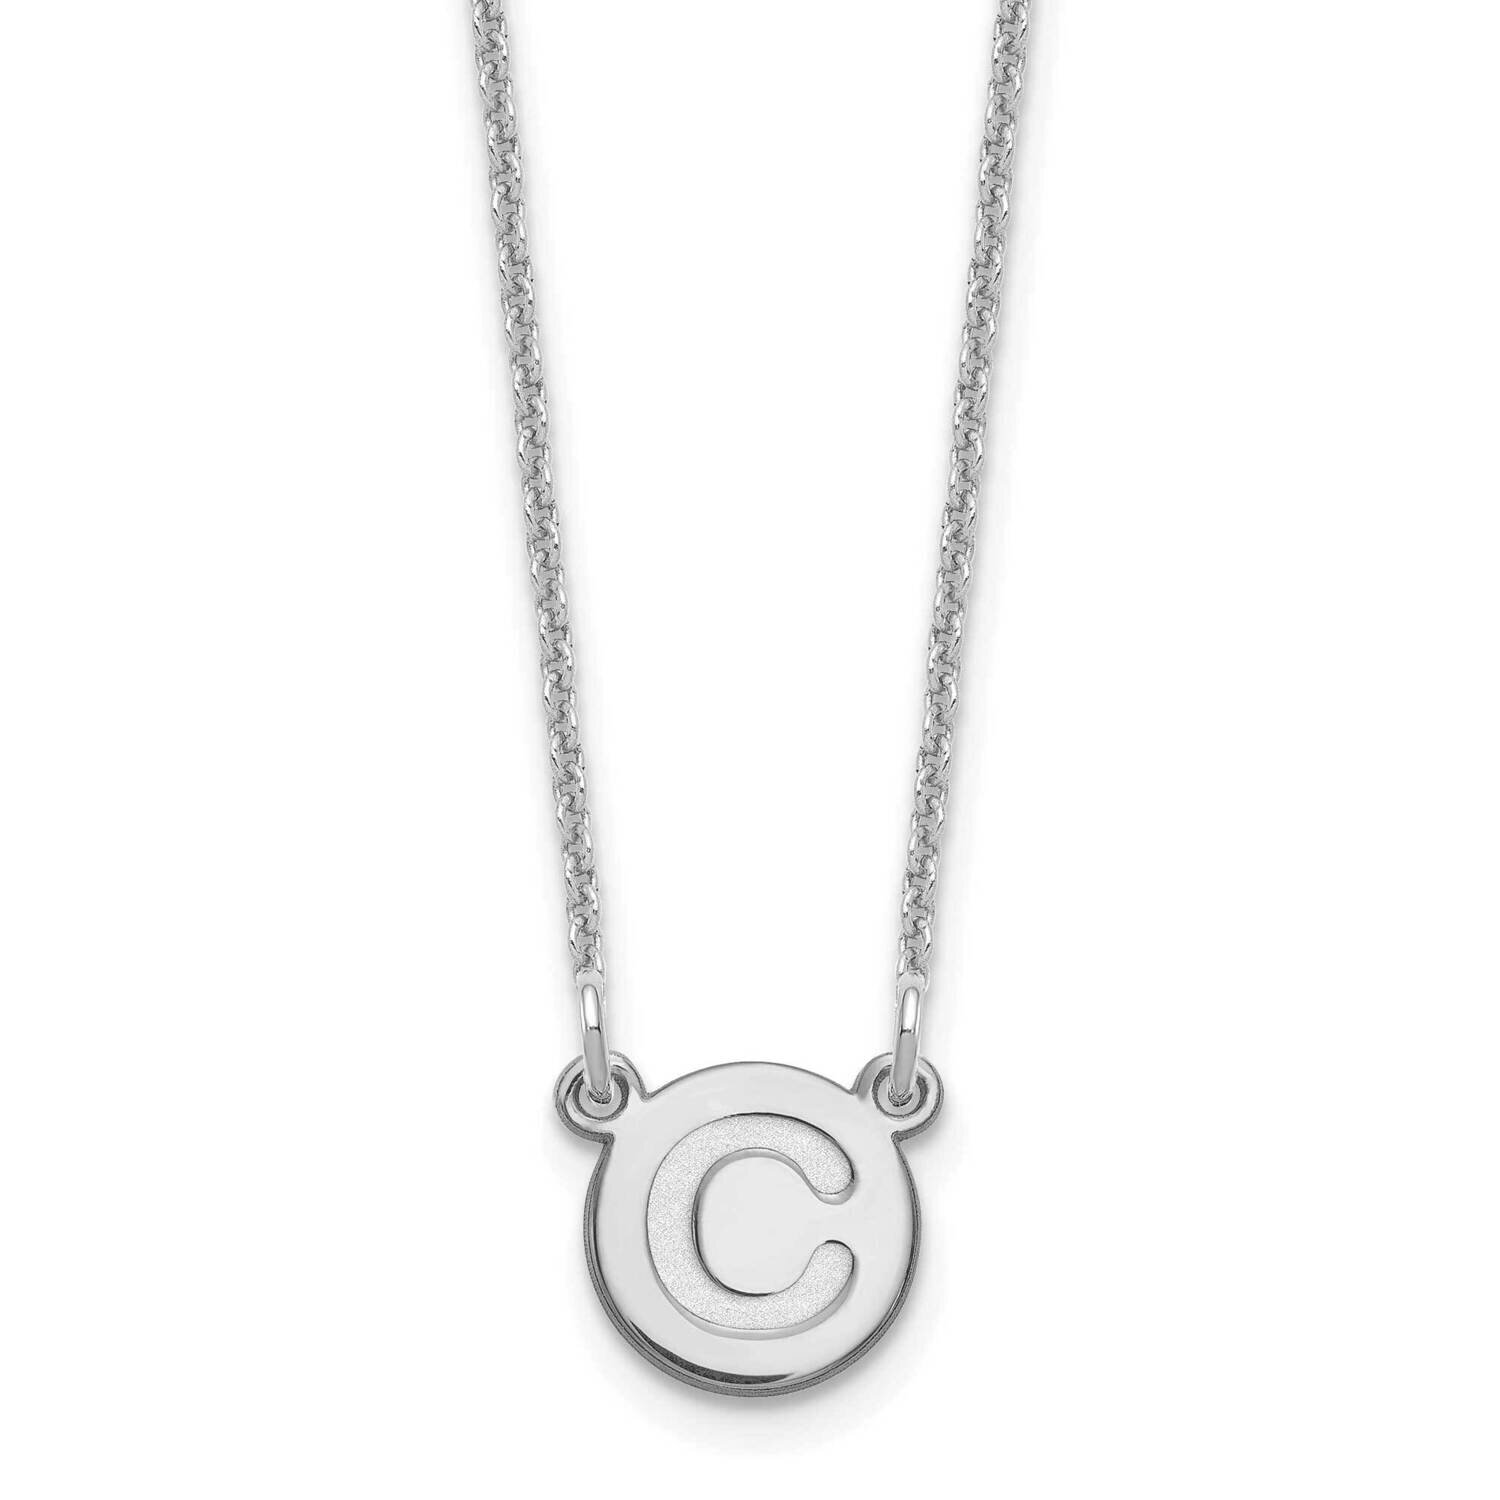 Tiny Circle Block Initial Letter C Necklace 14k White Gold XNA722W/C